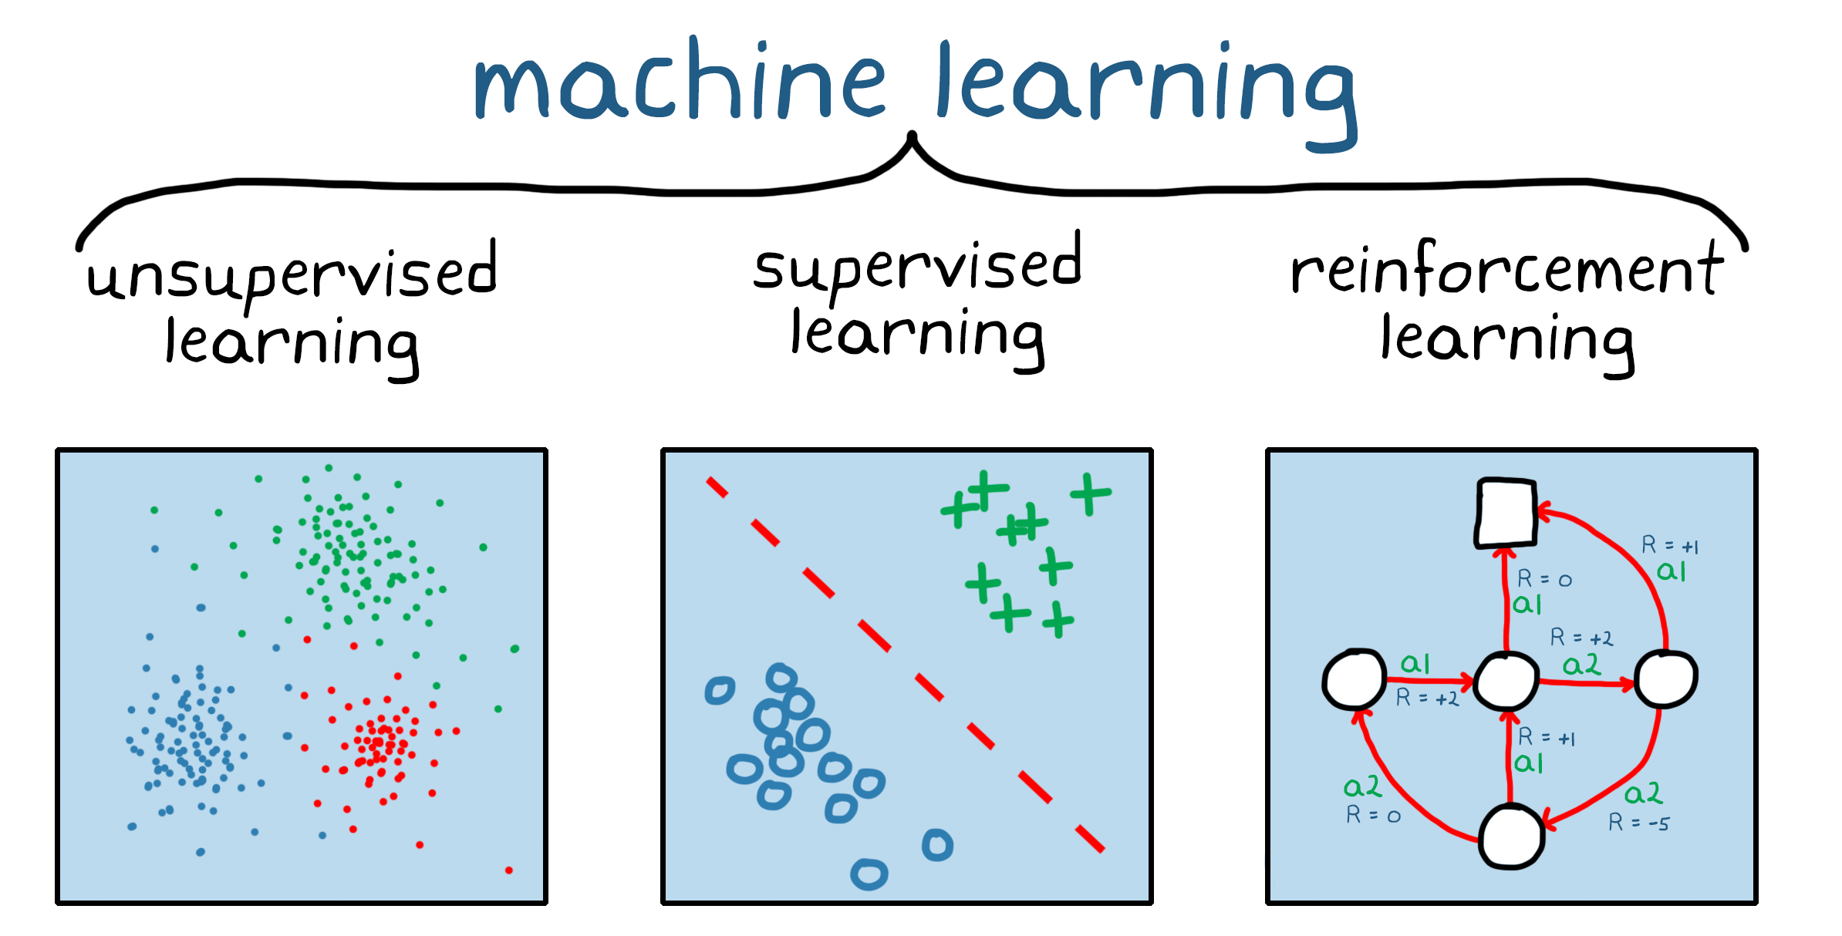 Figure 1. Three broad categories of machine learning: unsupervised learning, supervised learning and reinforcement learning